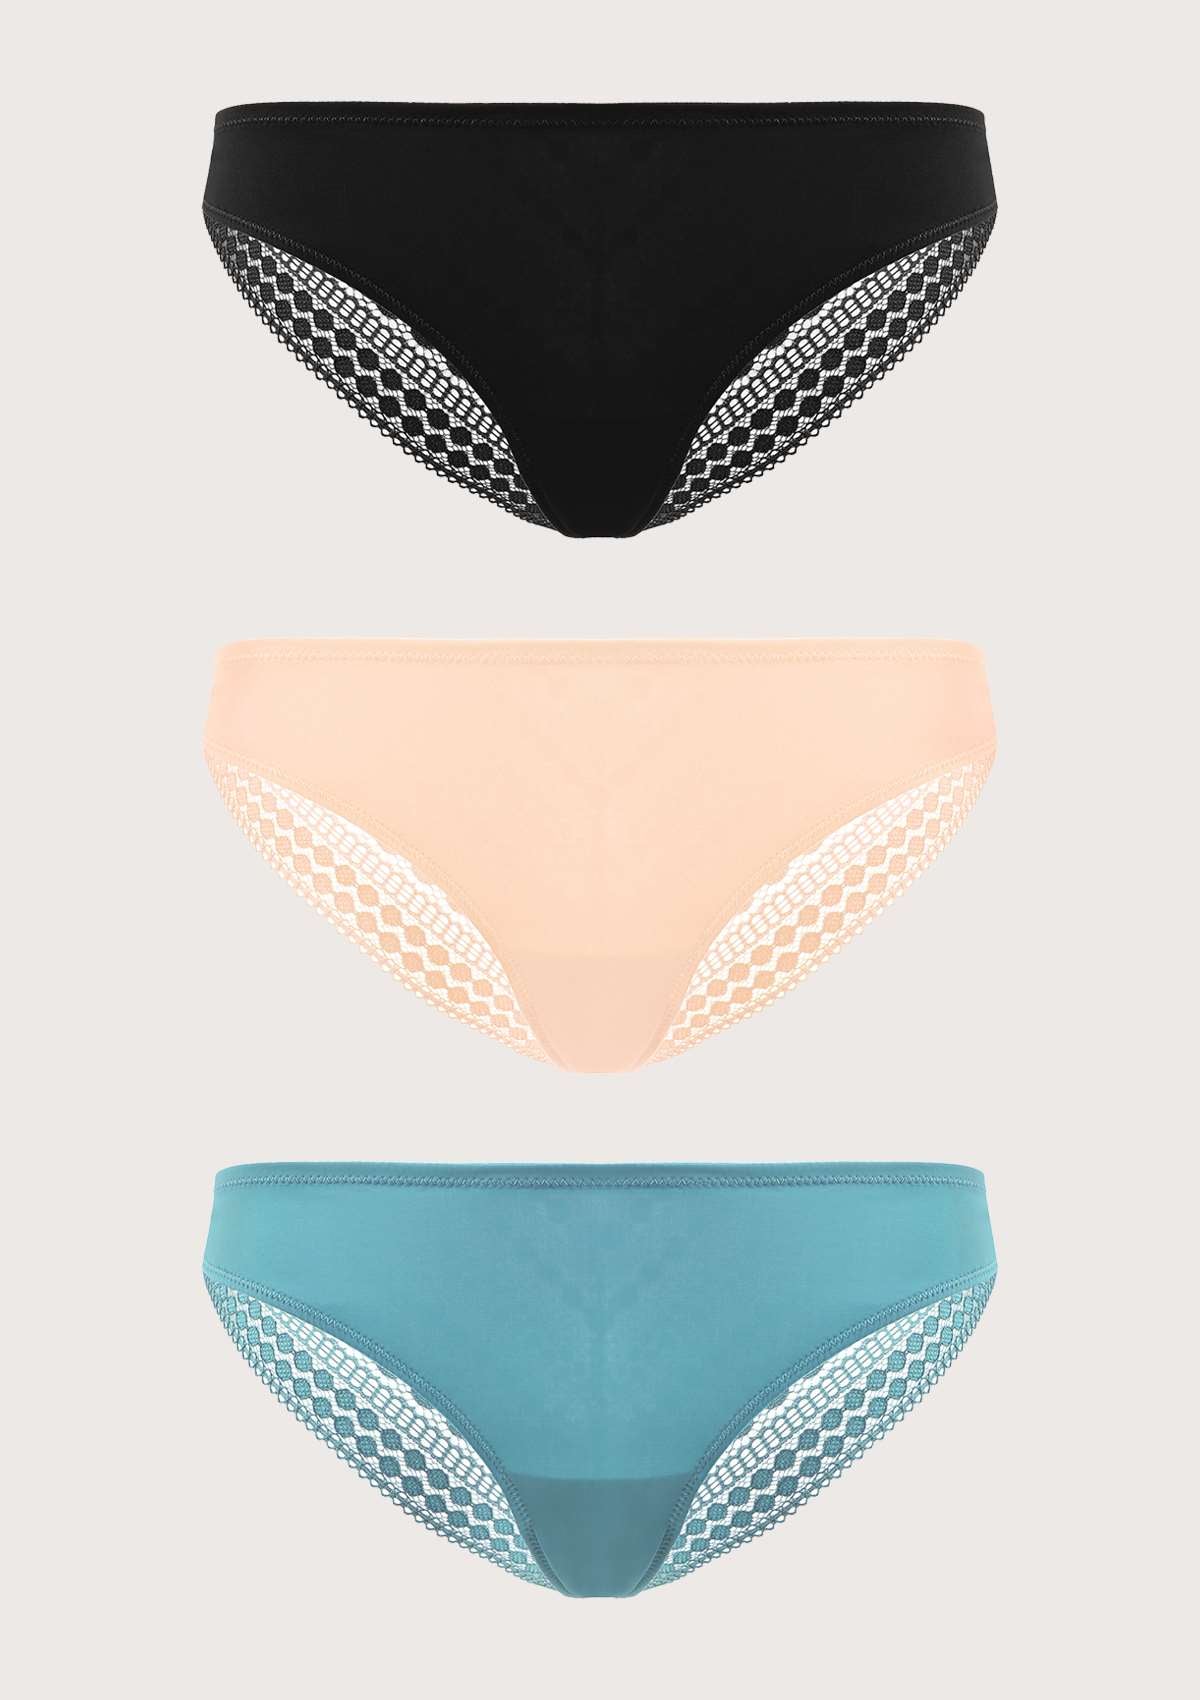 HSIA Polka Dot Super Soft Lace Back Cheeky Panties 3 Pack - L / Black+Rose Cloud+Brittany Blue